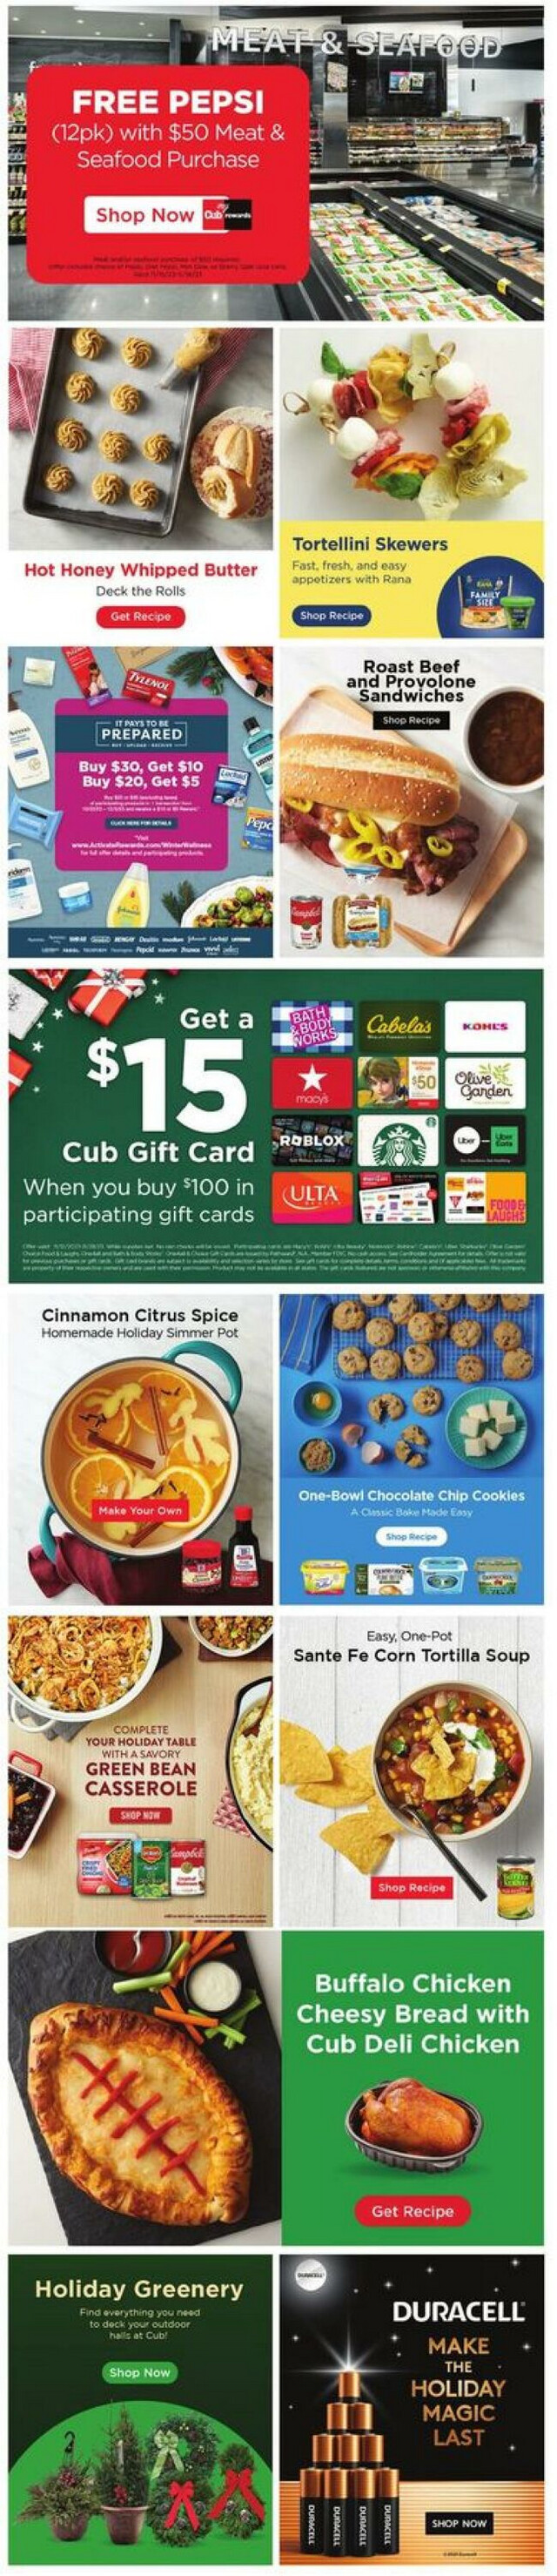 Cub Foods Ad from 11/12/2023